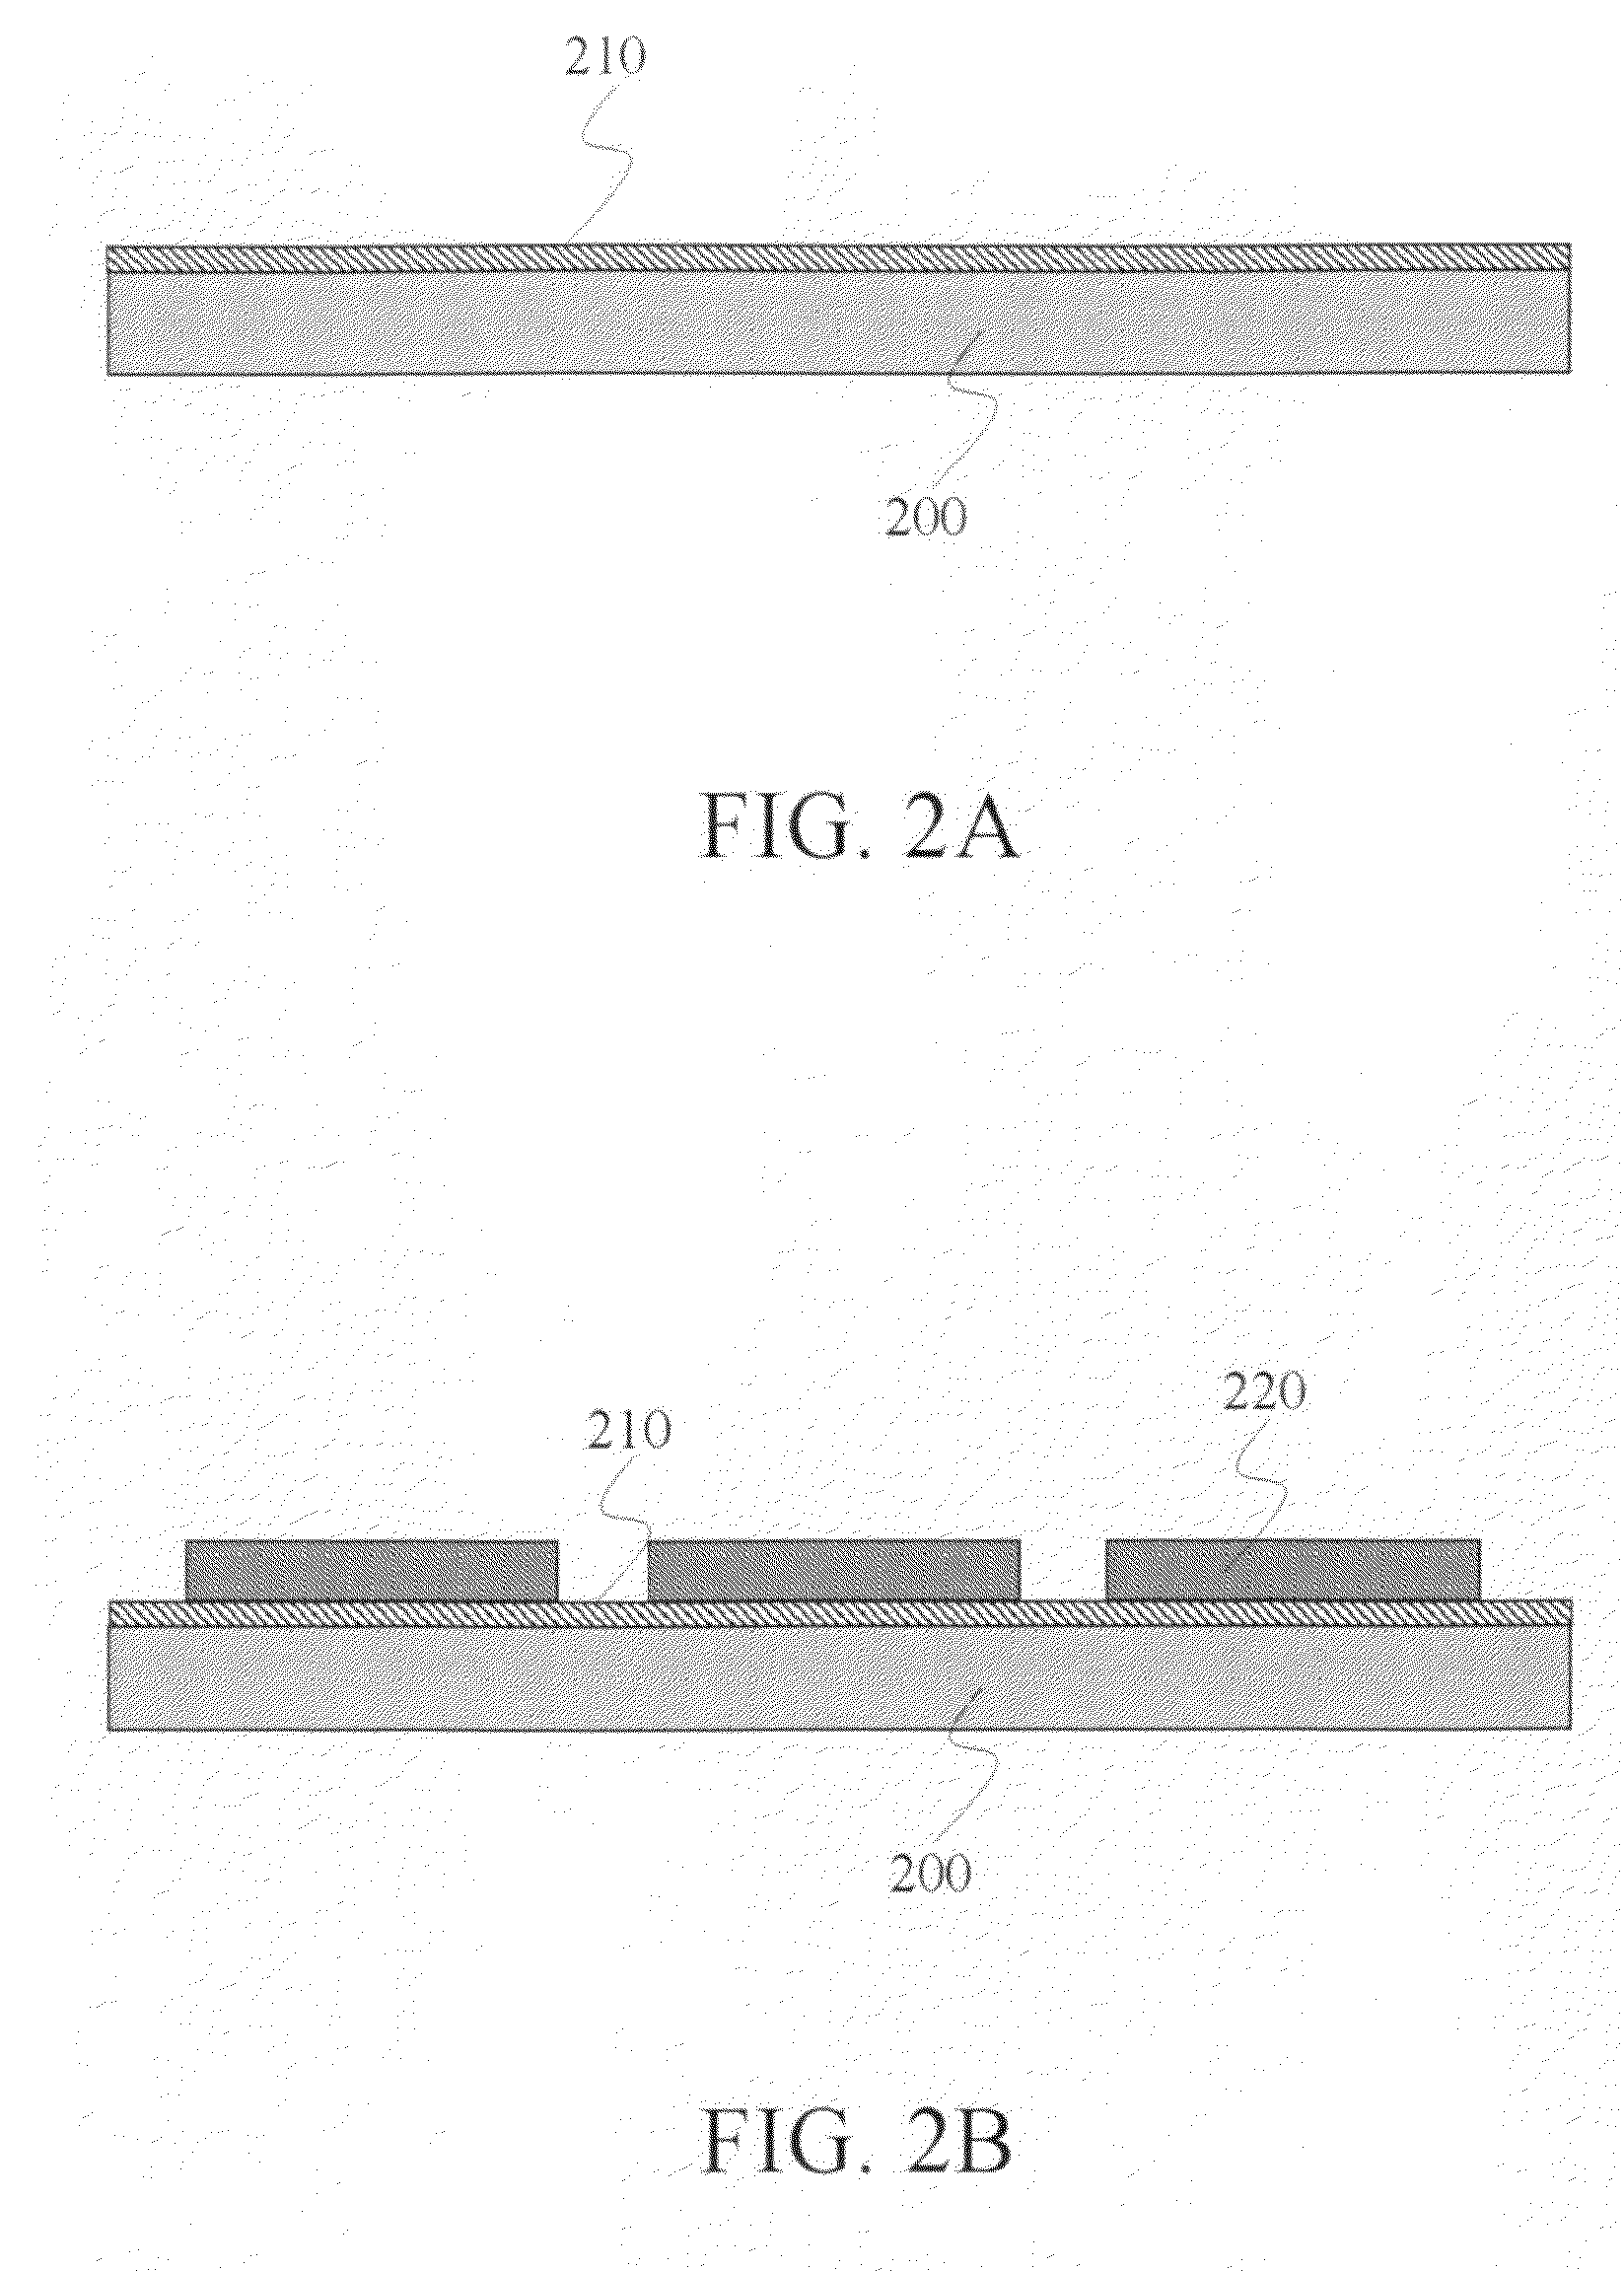 Three-dimensional chip-stack package and active component on a substrate